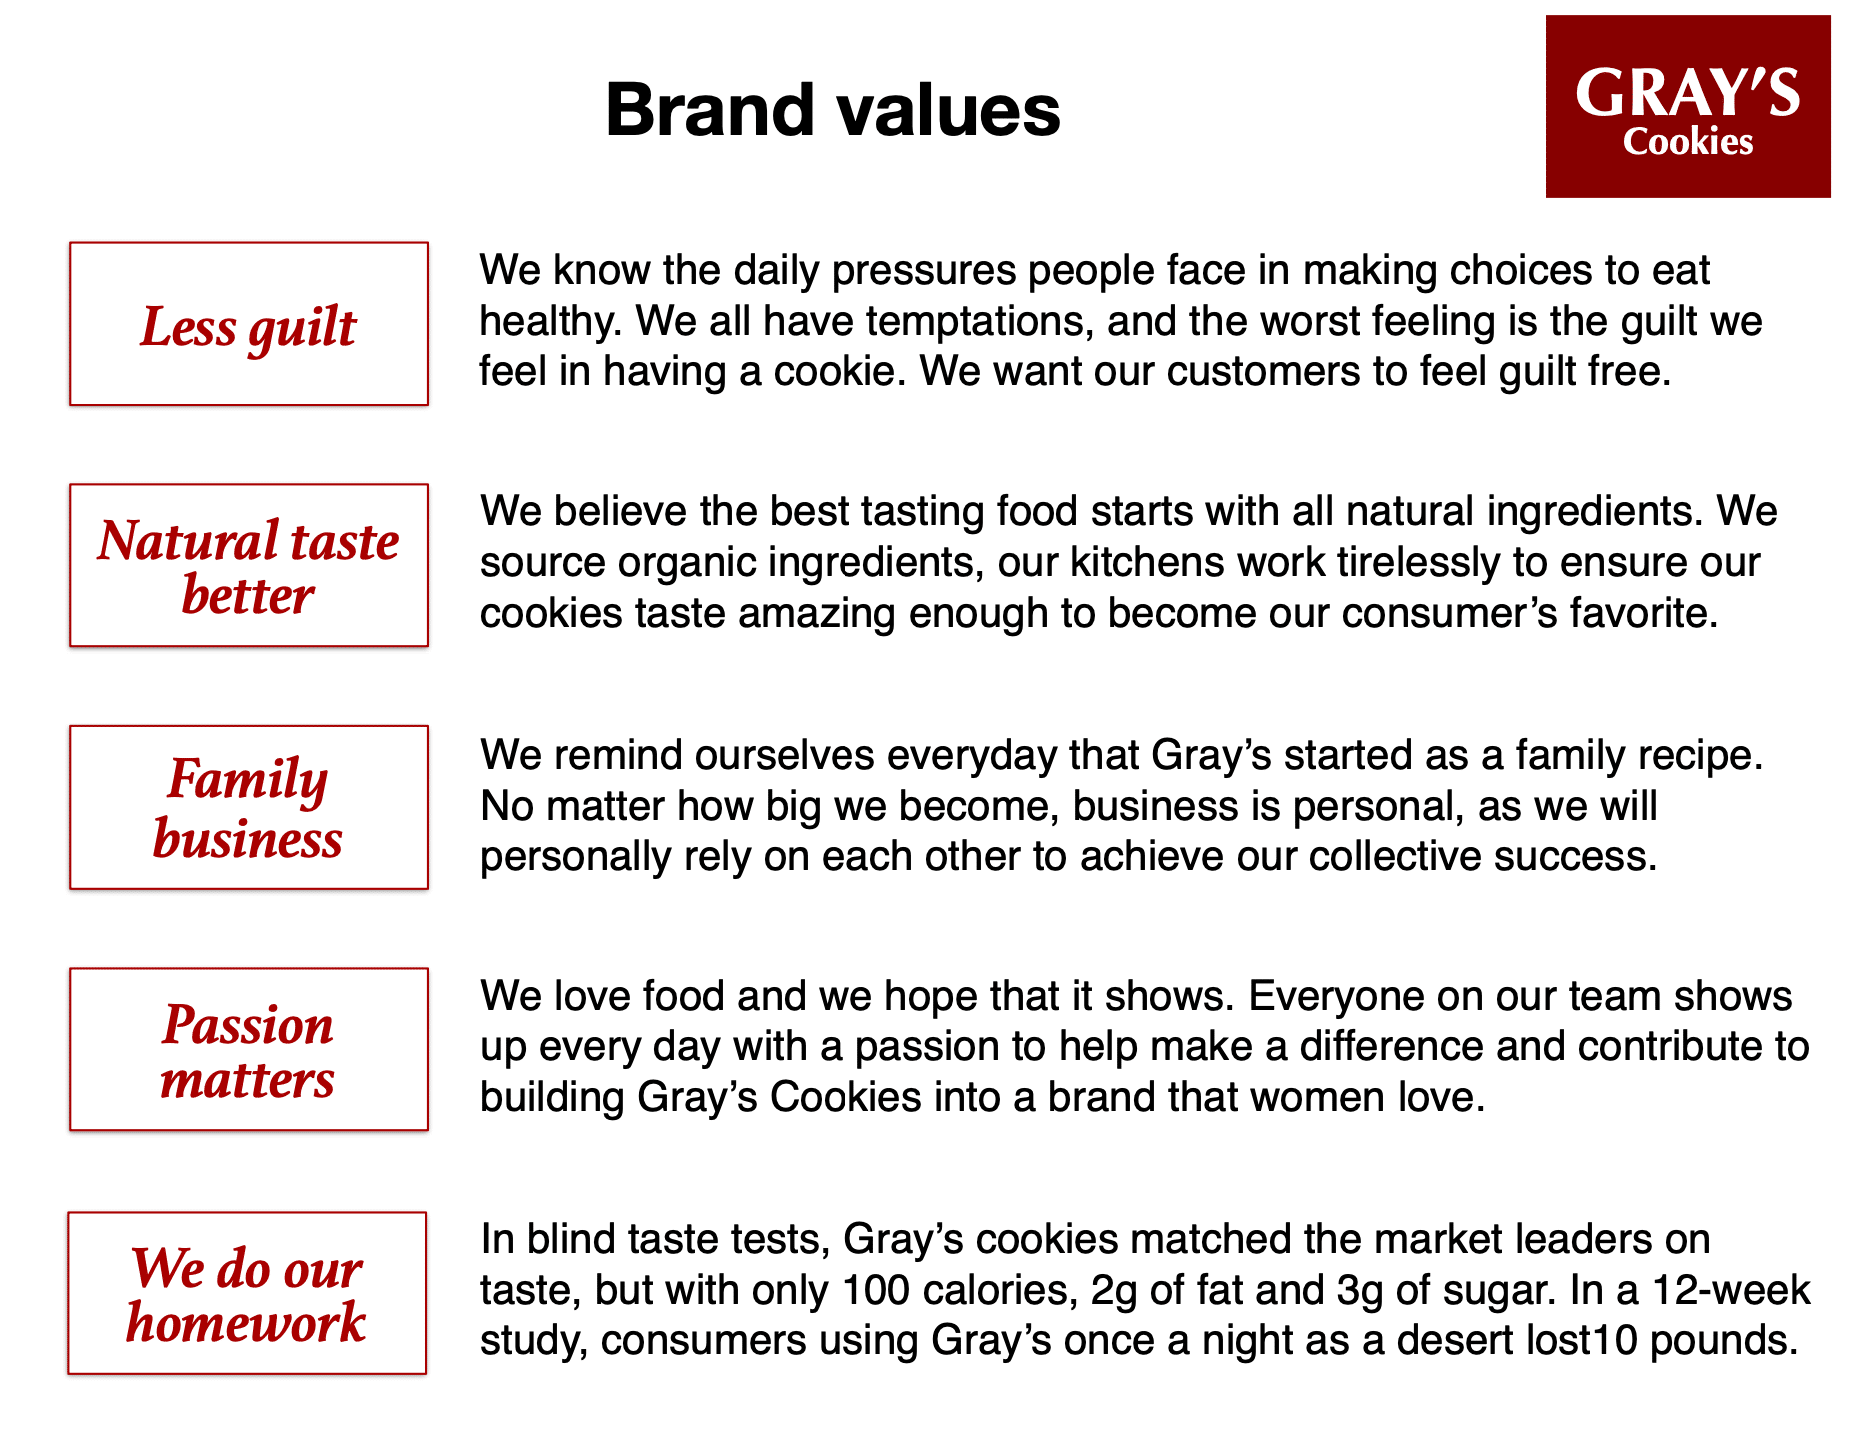 It's All About the Value of the Brand